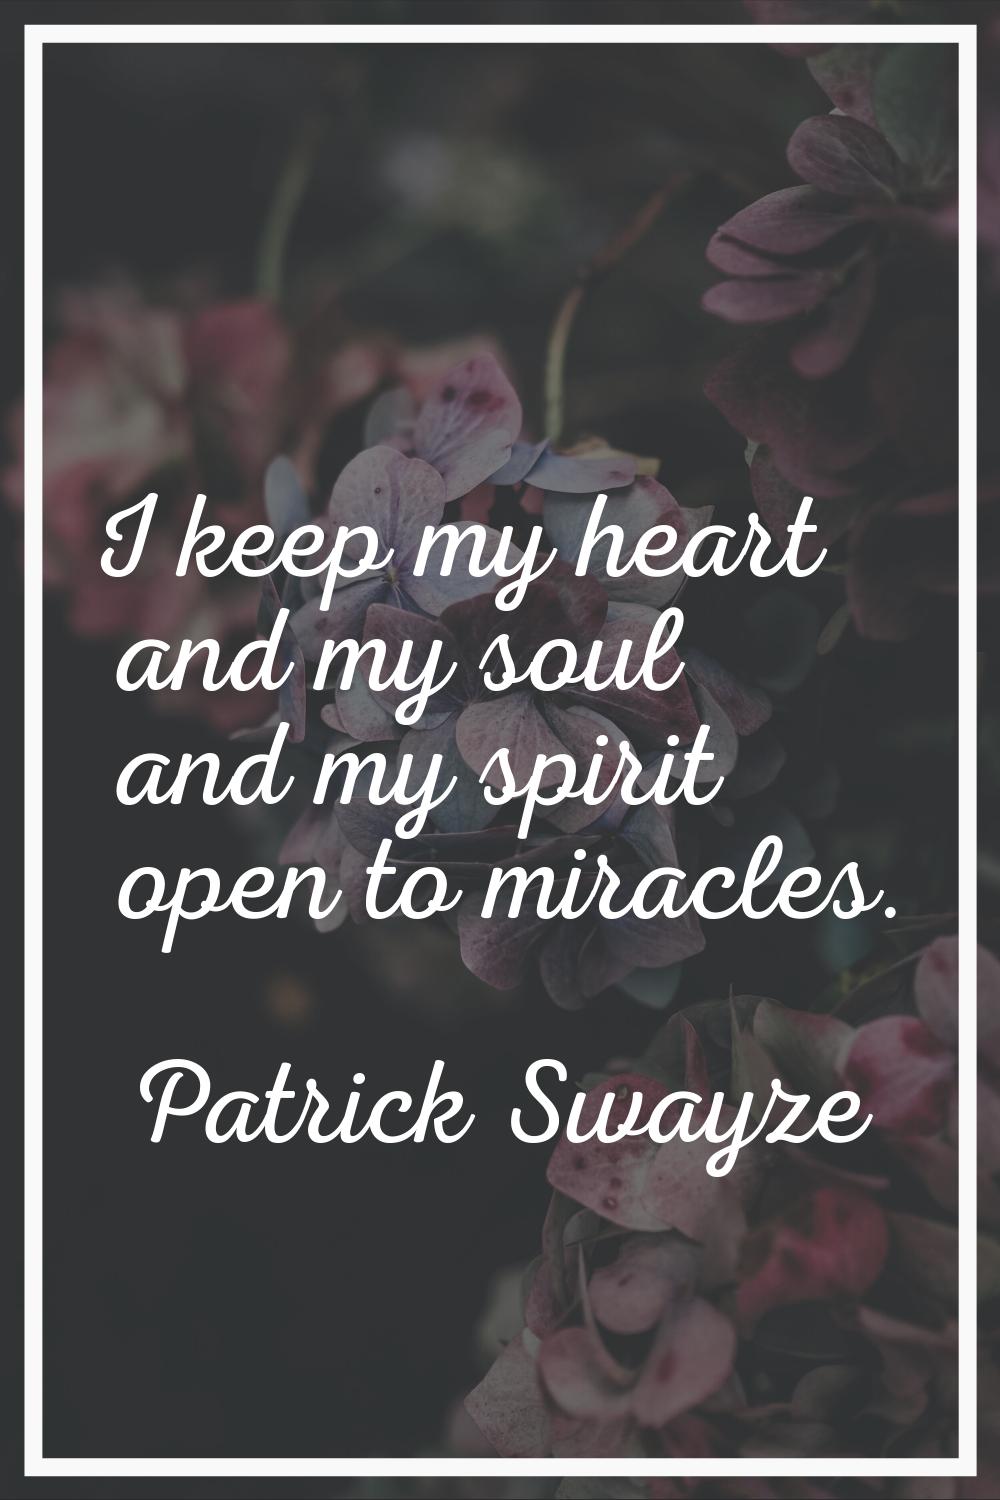 I keep my heart and my soul and my spirit open to miracles.